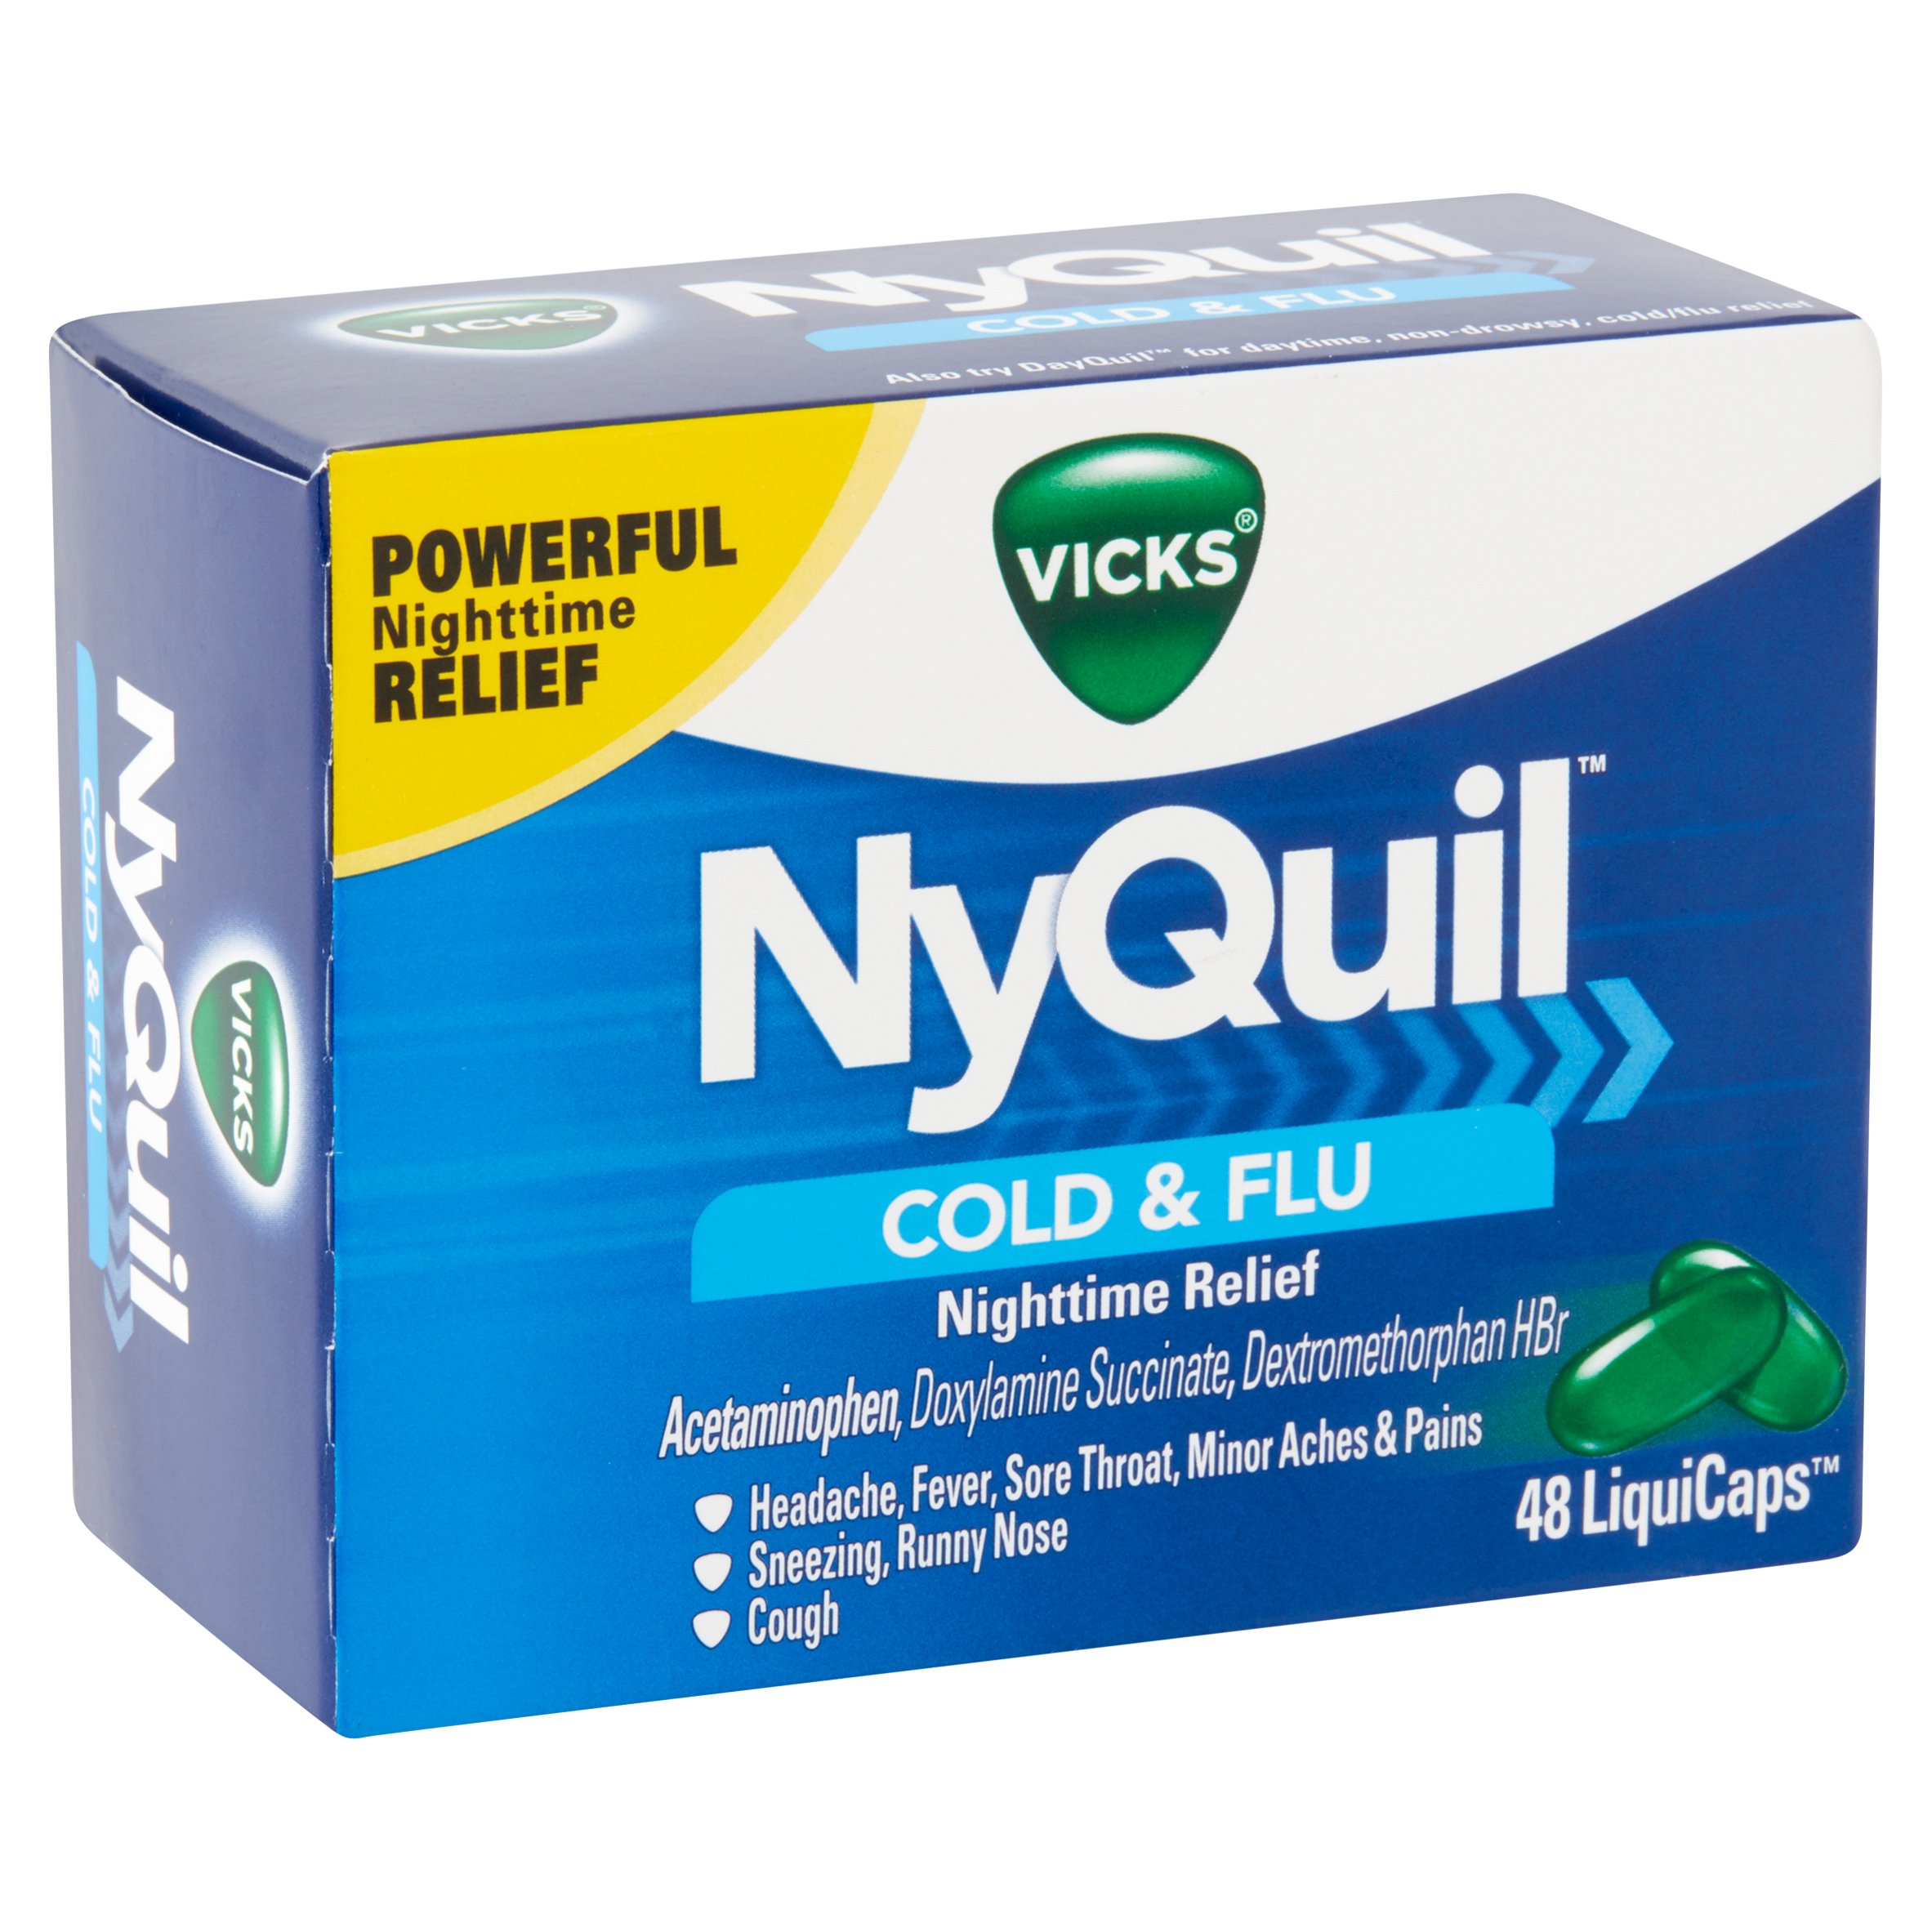 Vicks NyQuil Cold & Flu Nighttime Relief LiquiCaps, 48 count - image 2 of 4